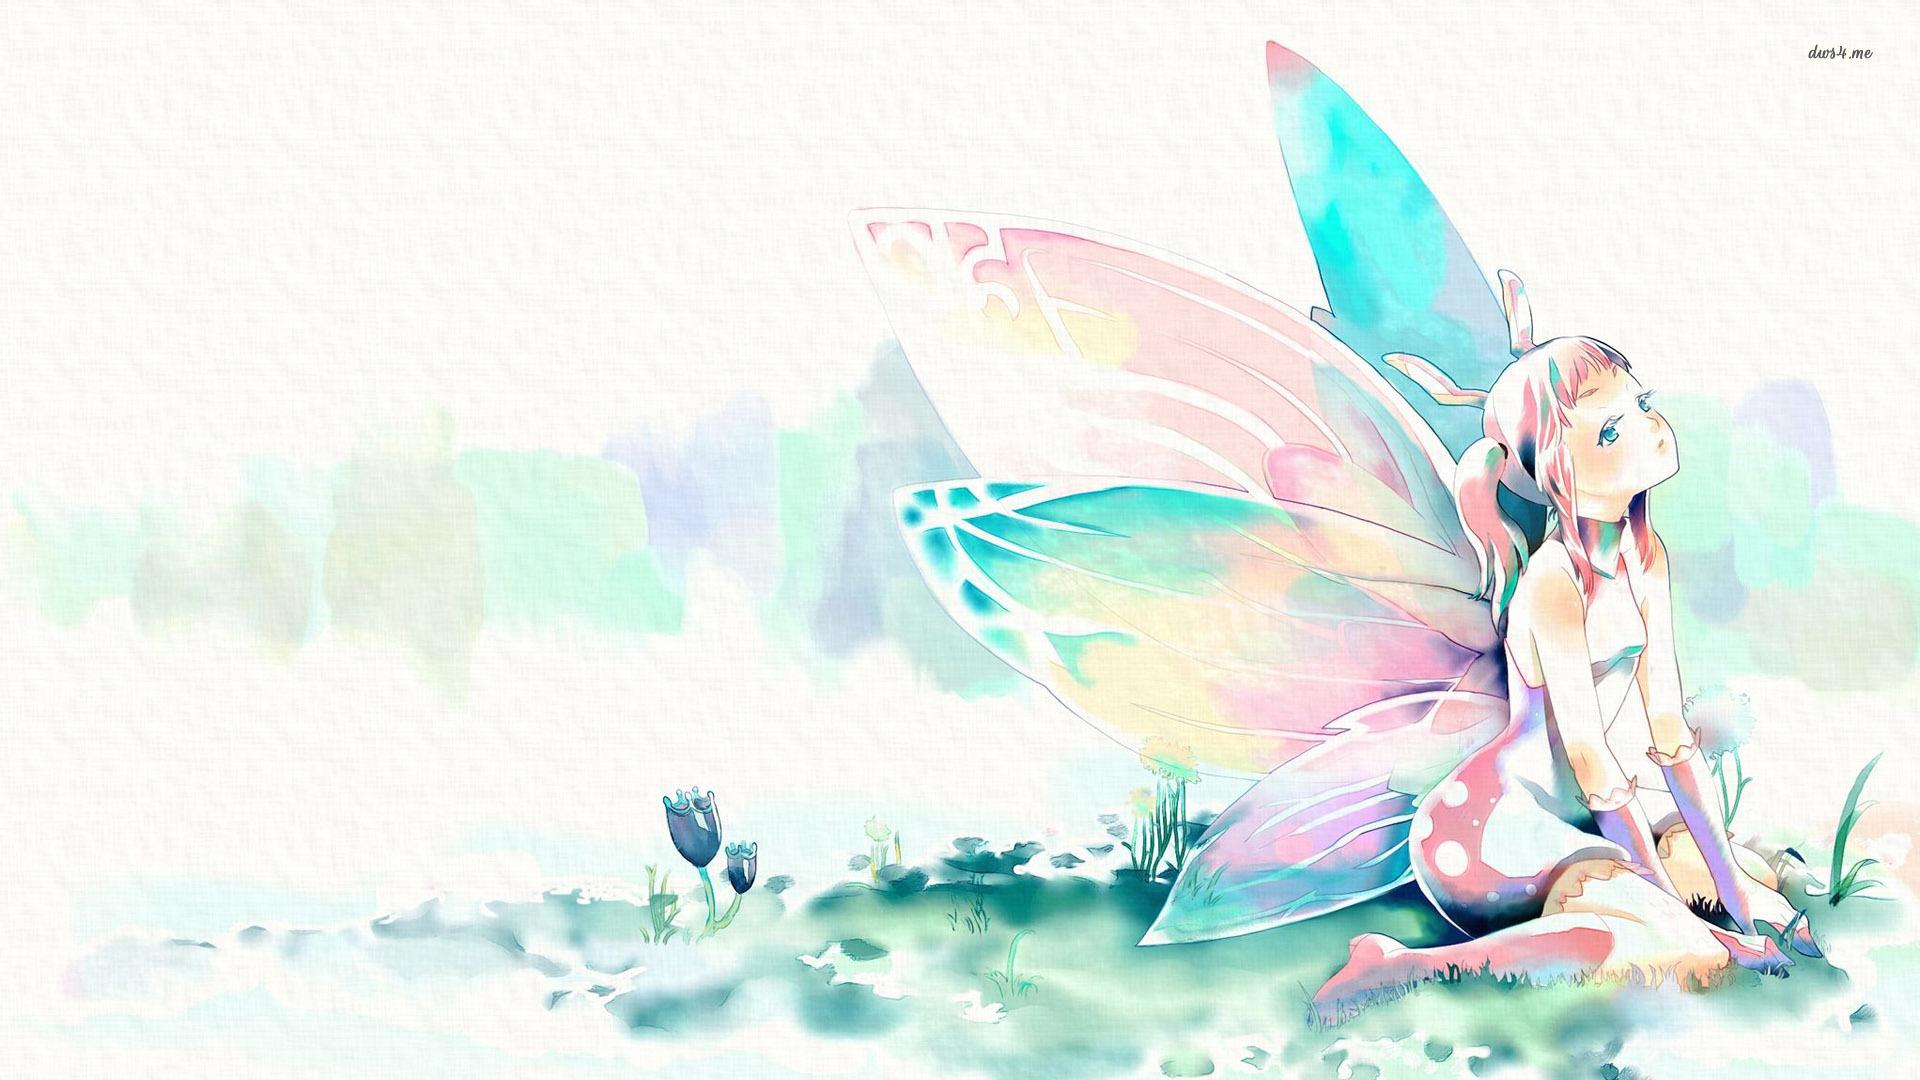 Anime Fairy Wallpapers